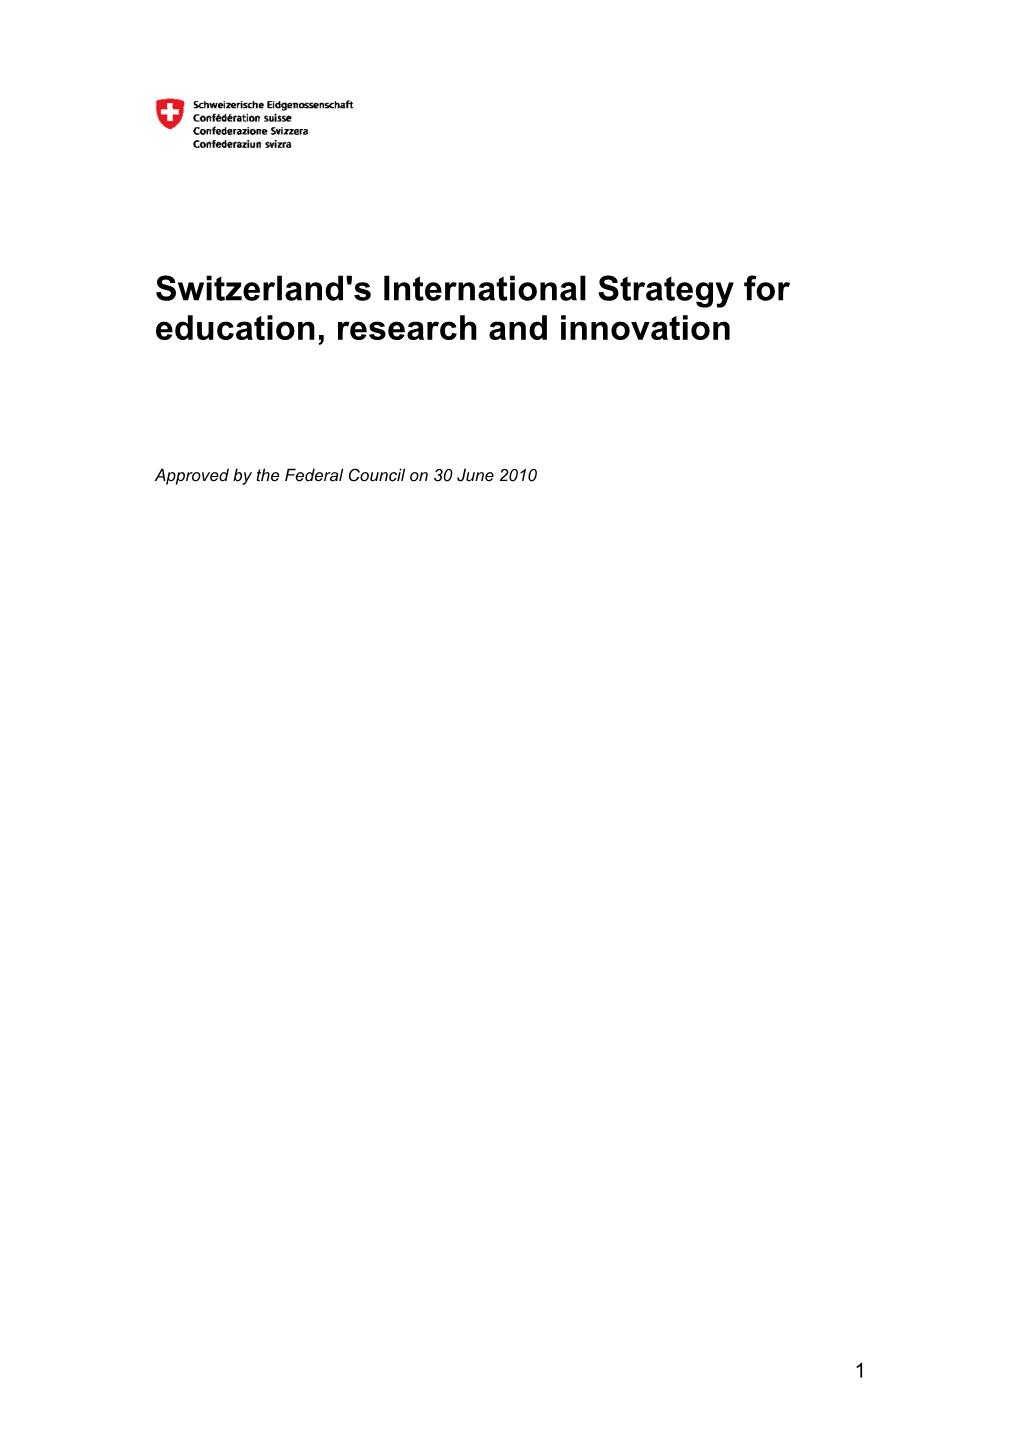 Switzerland's International Strategy for Education, Research and Innovation